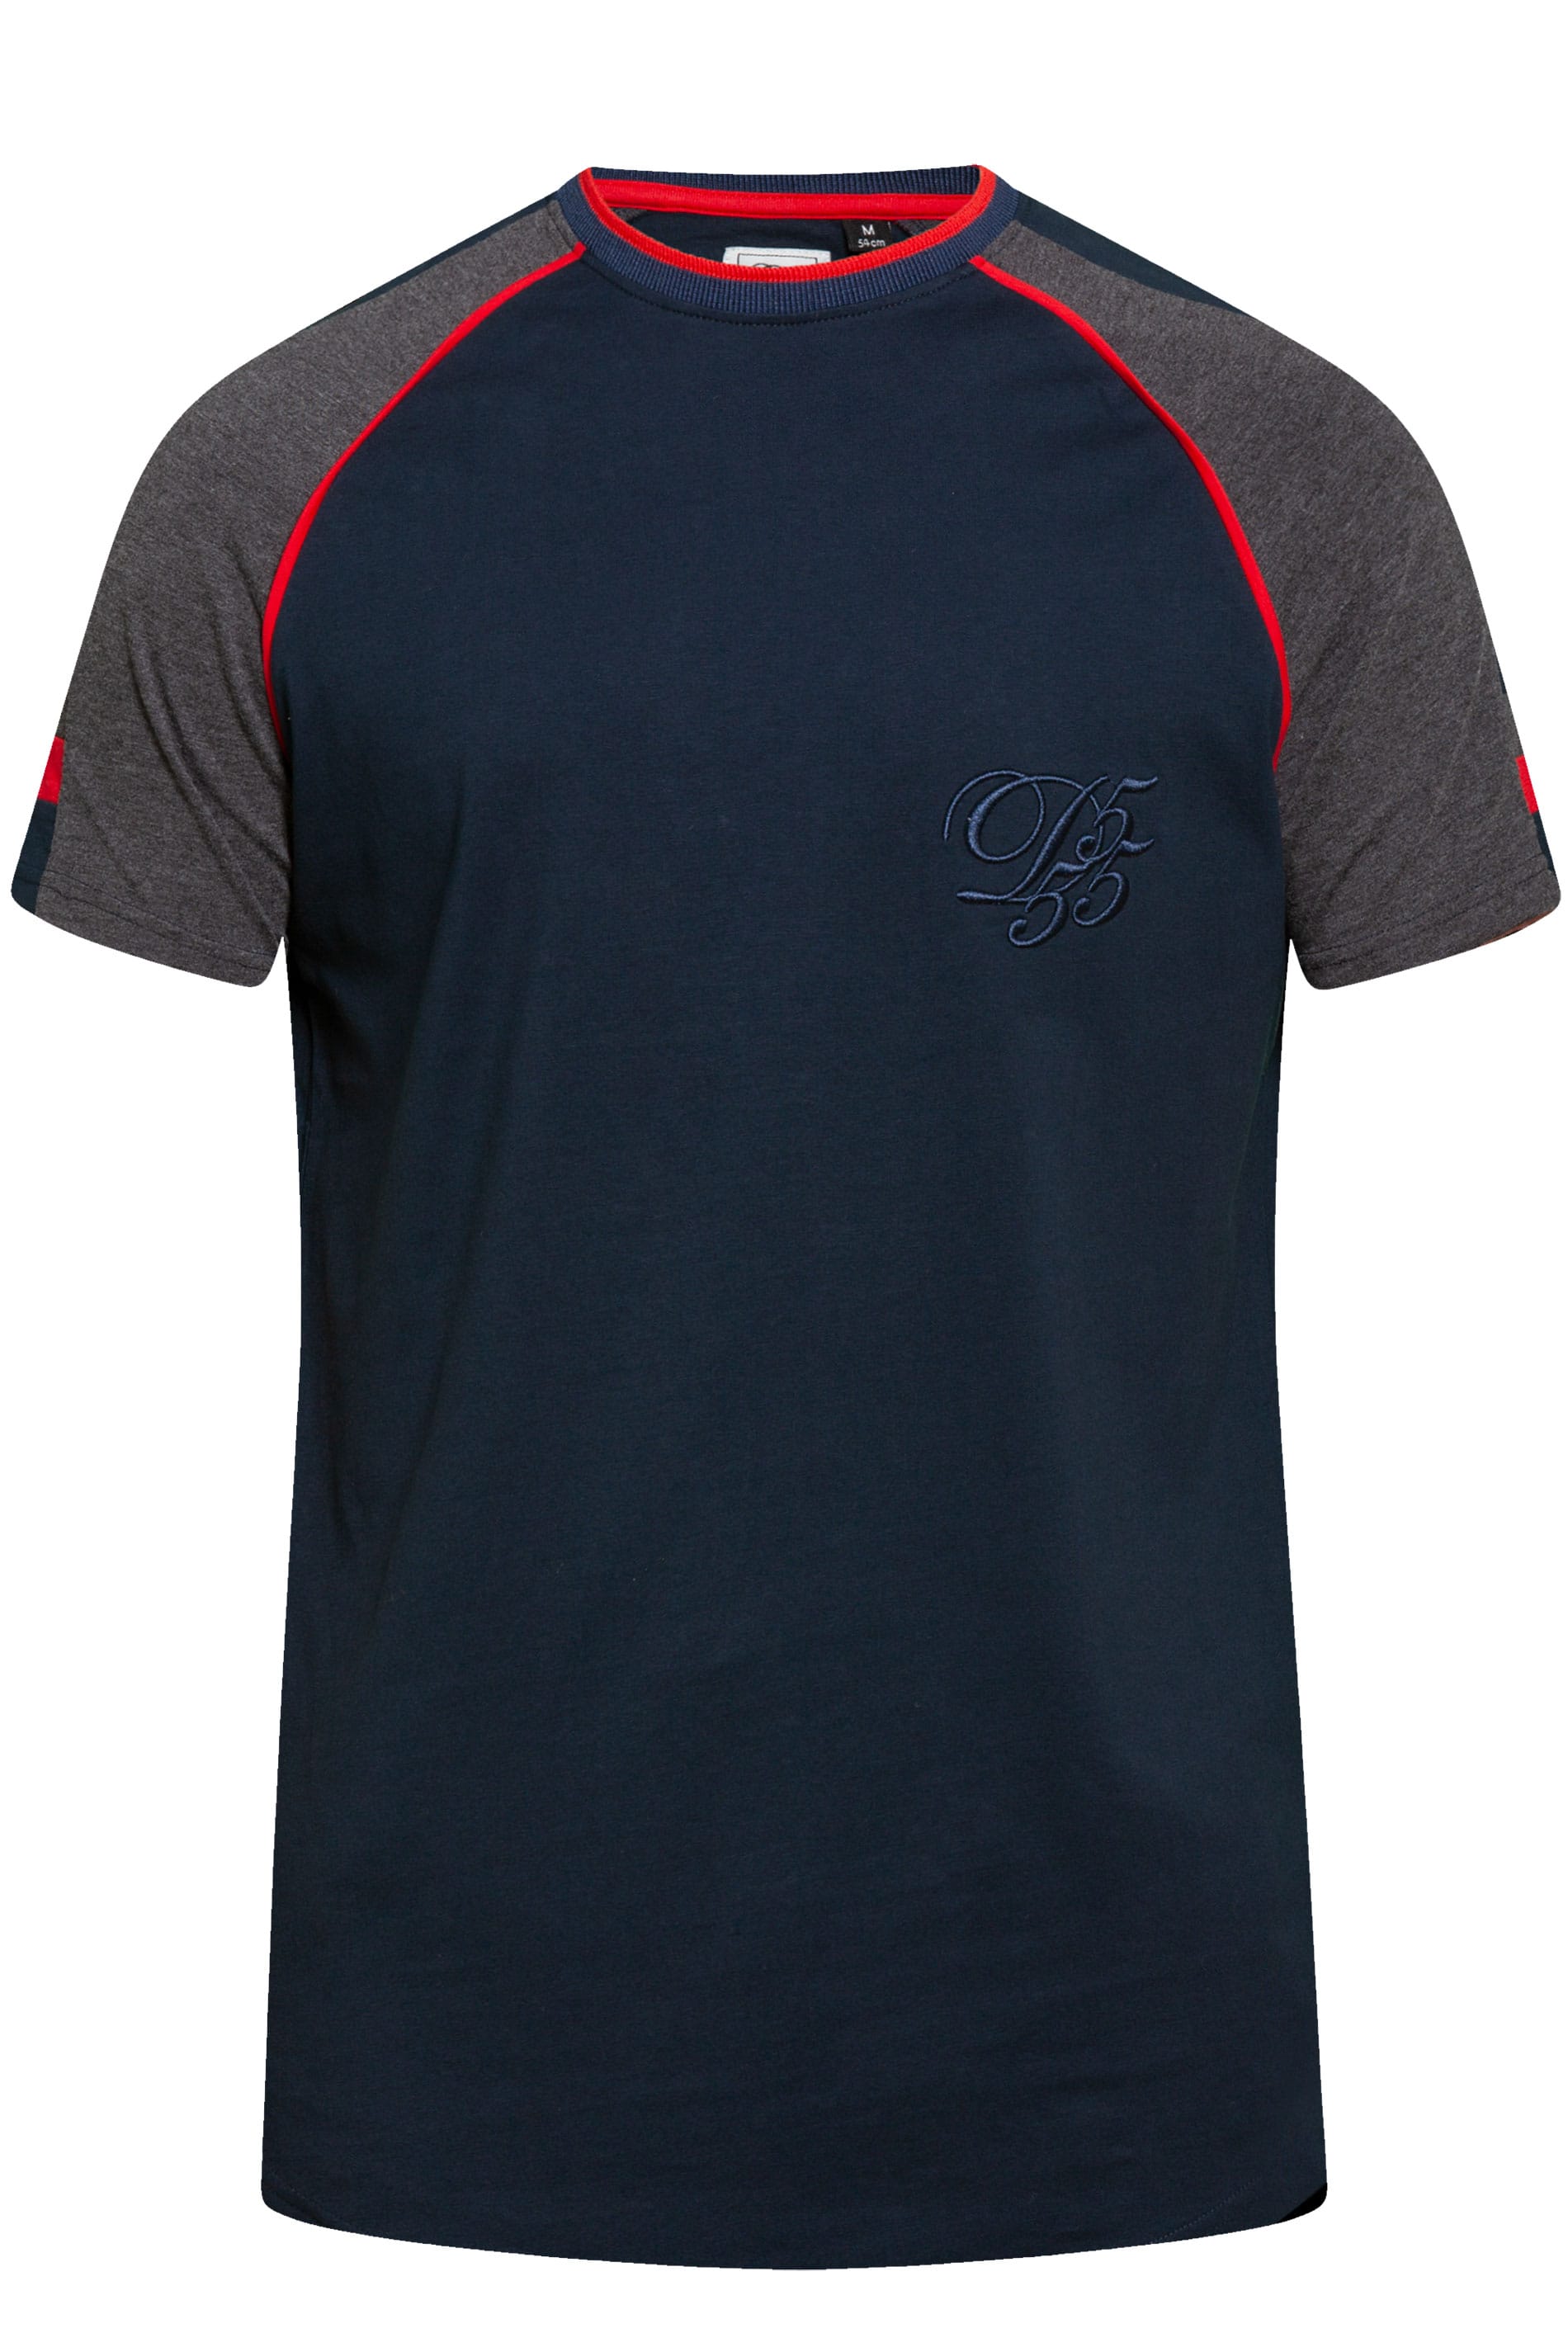 D555 Couture Navy Piping T-Shirt | BadRhino